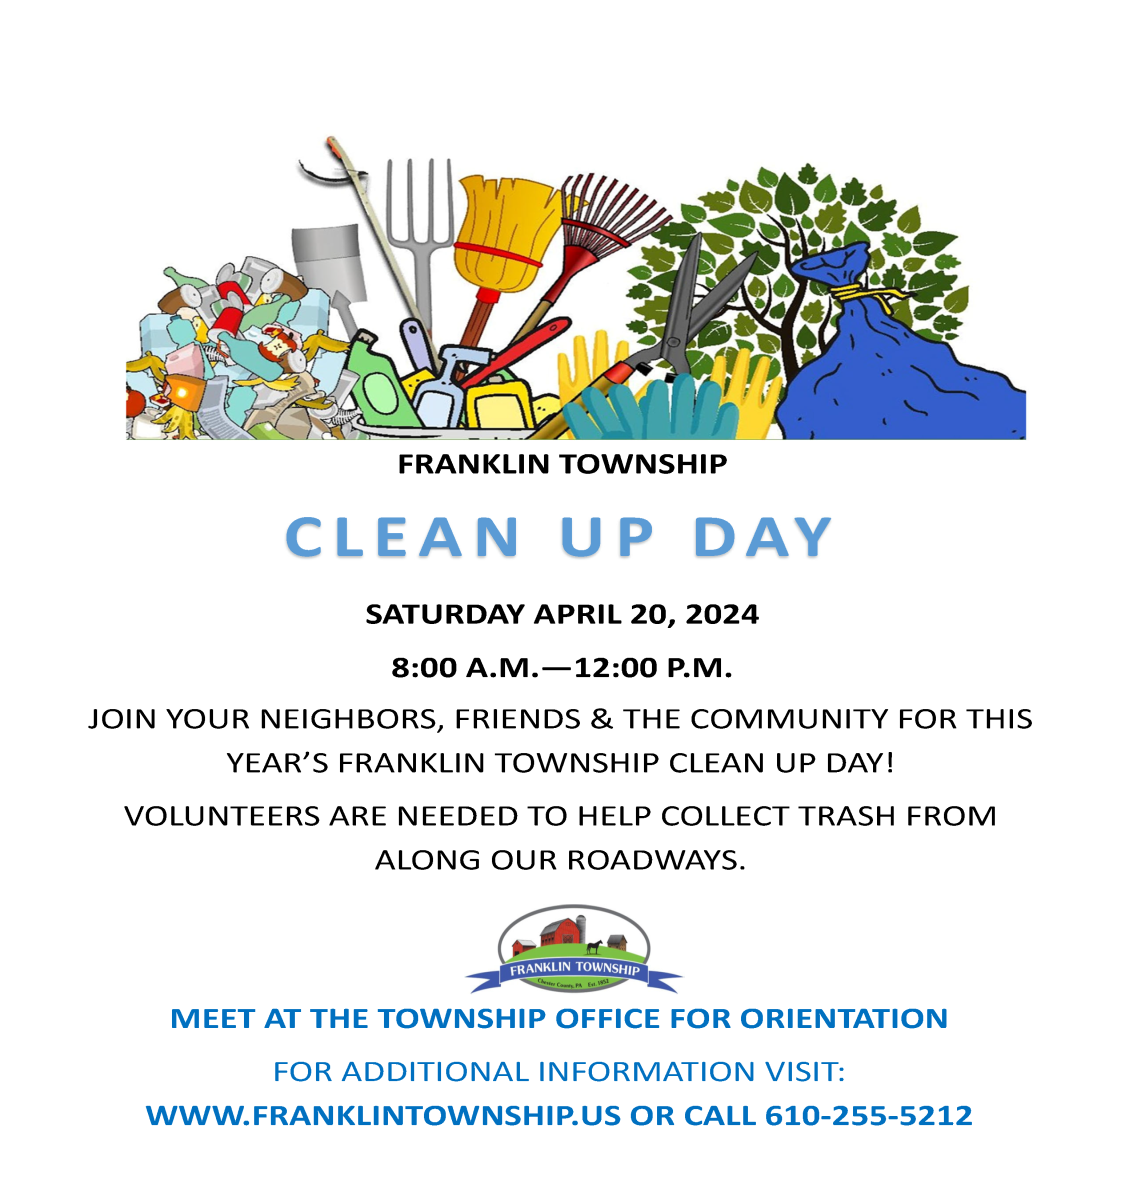 Franklin Township Cleanup Day - April 20, 2024